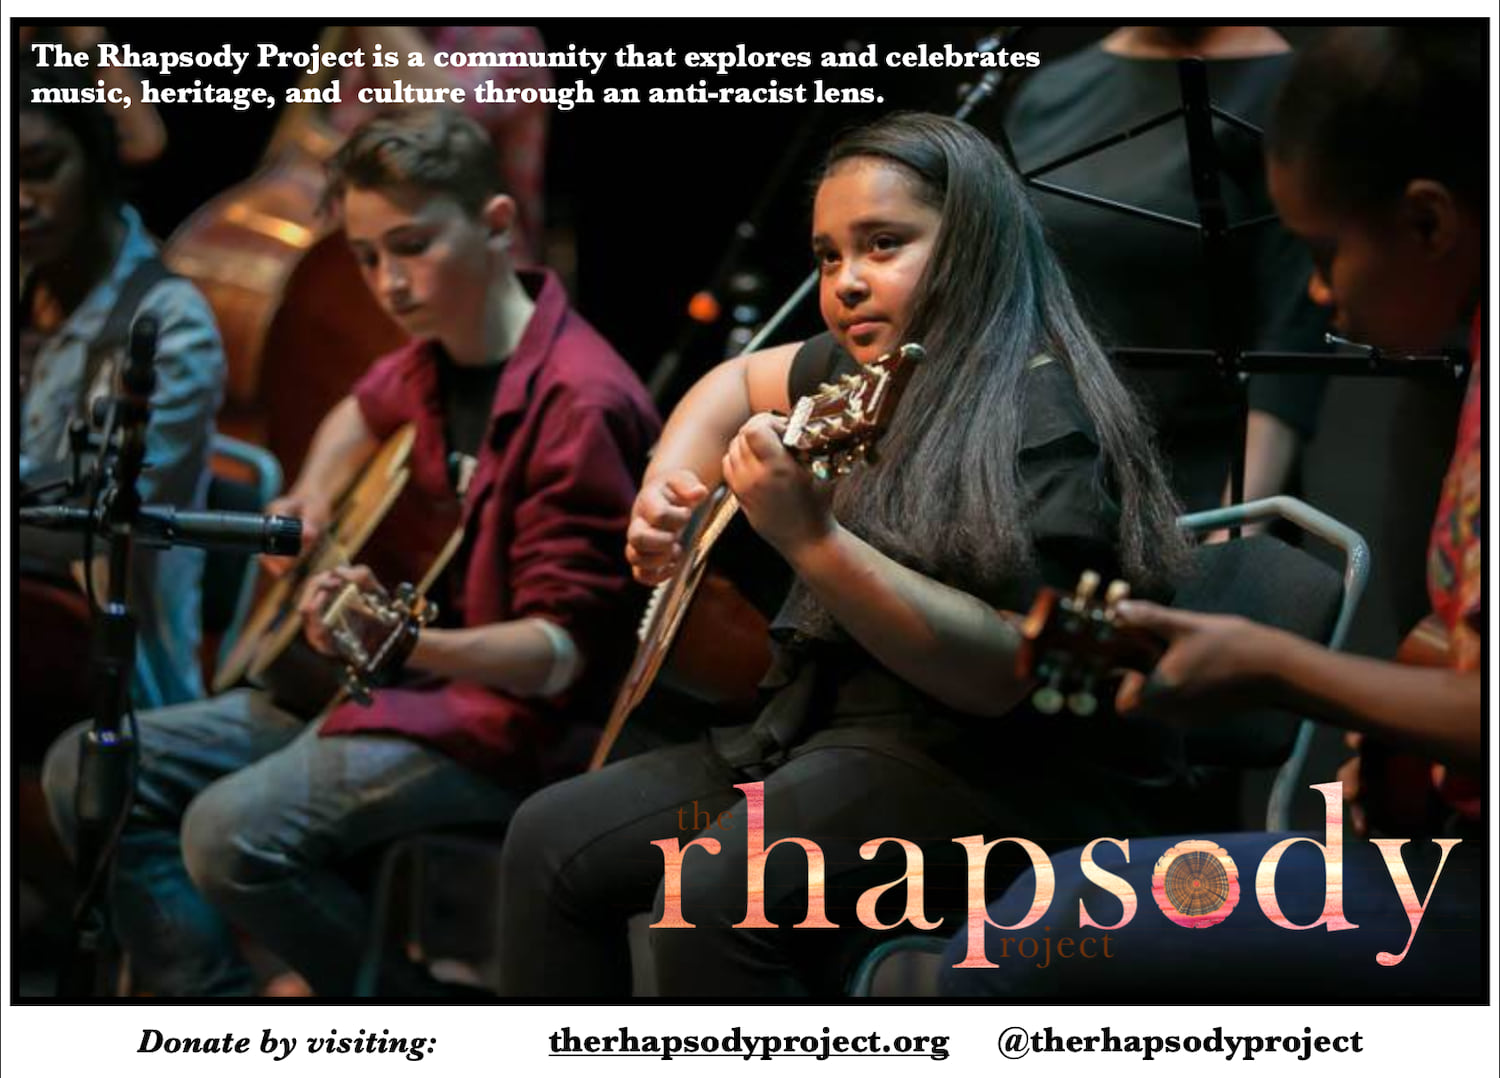 Rhapsody Project students seated together playing stringed instruments